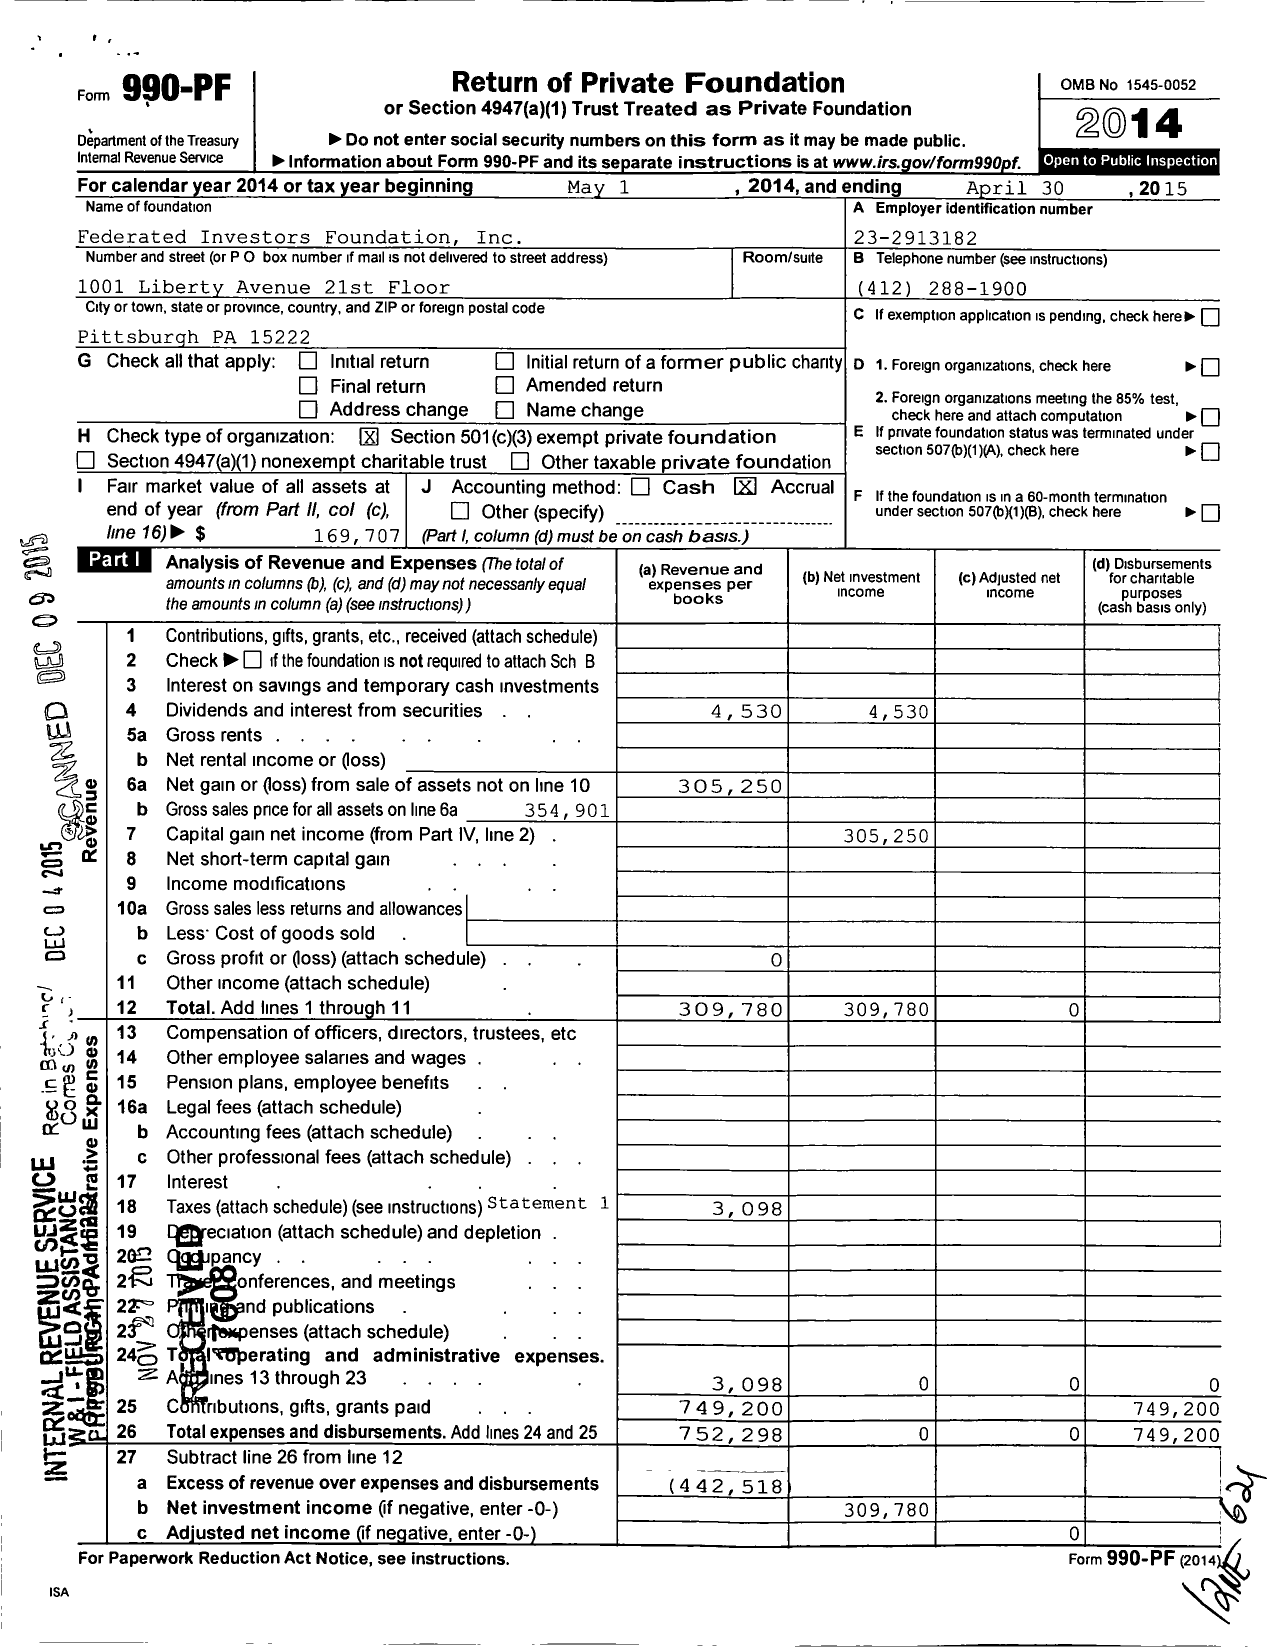 Image of first page of 2014 Form 990PF for Federated Investors Foundation